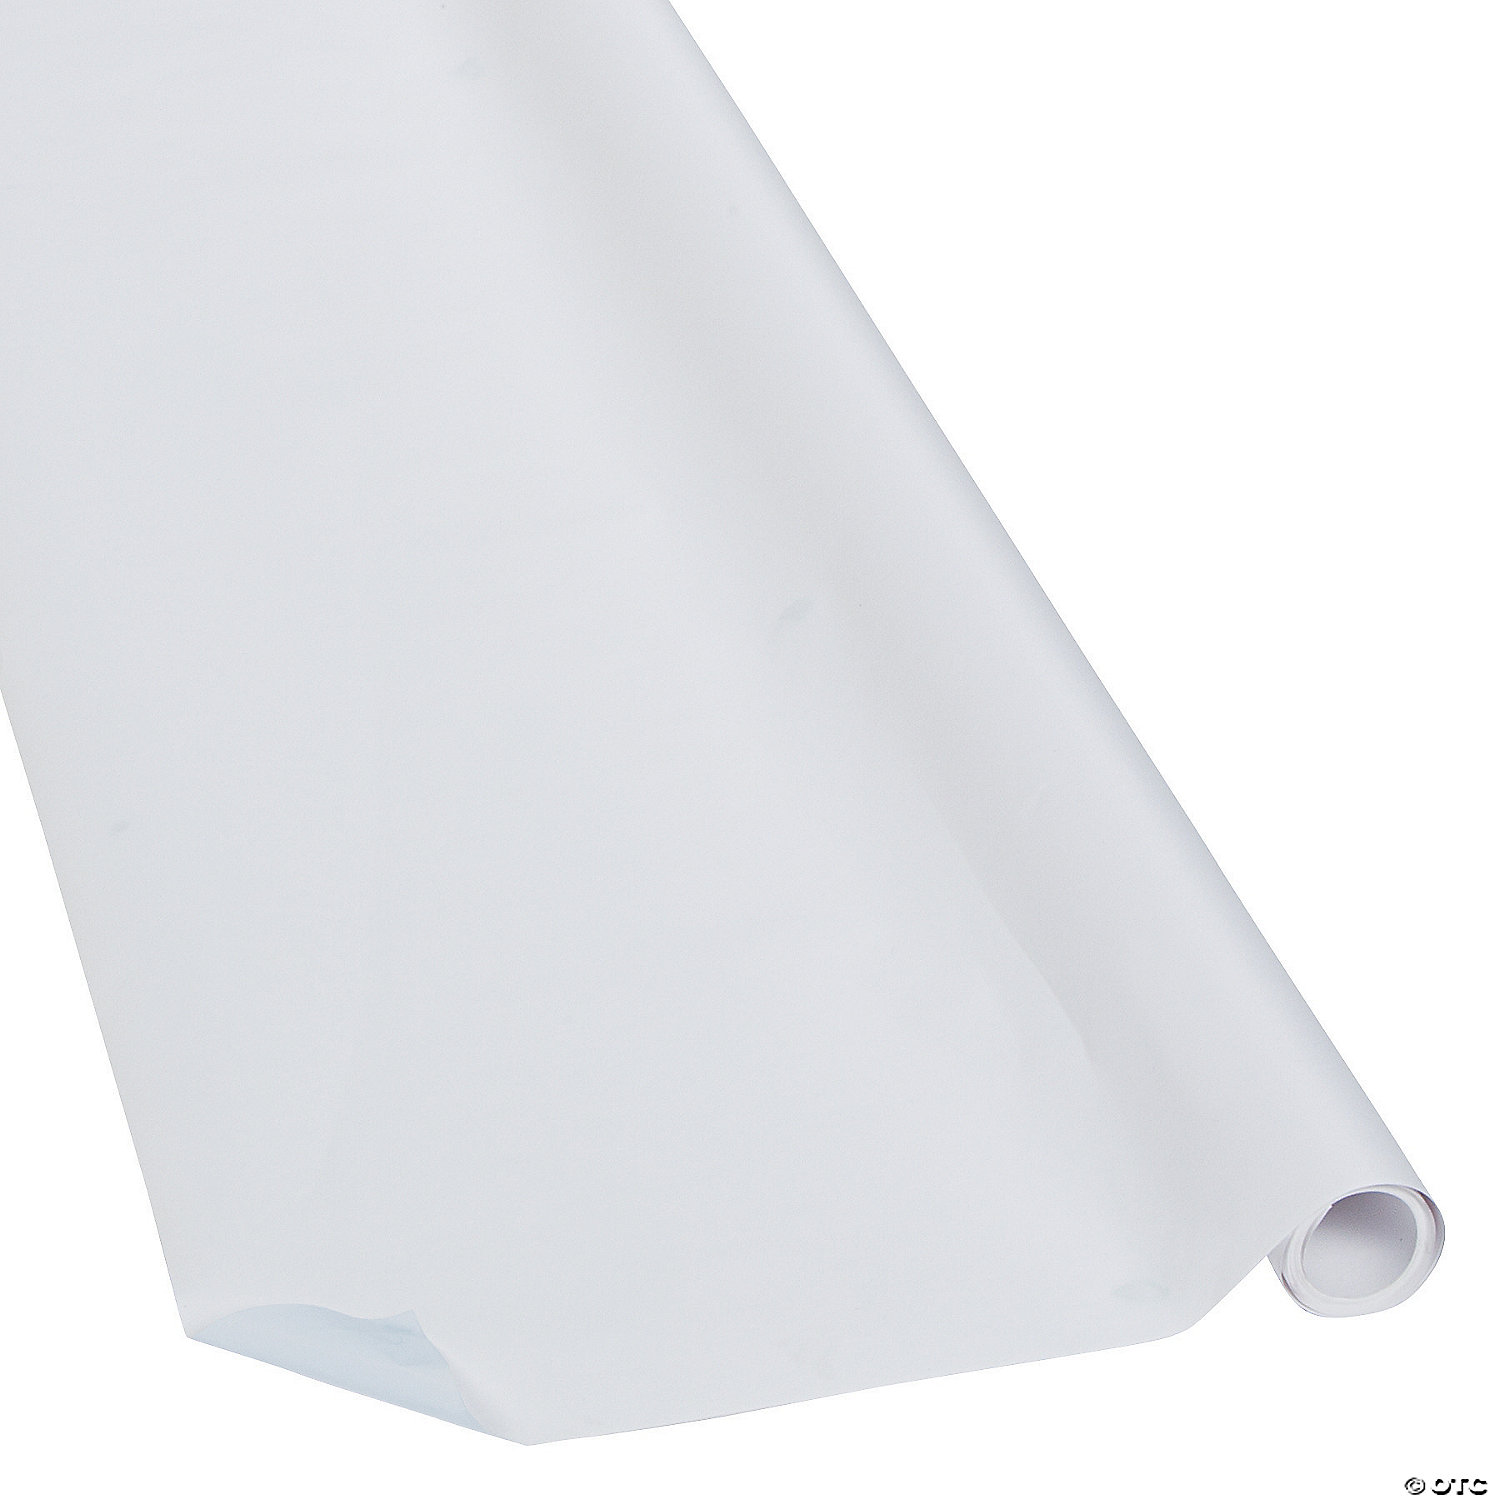 Poster Board, White, 22 x 28, 10 Sheets Per Pack, 3 Packs